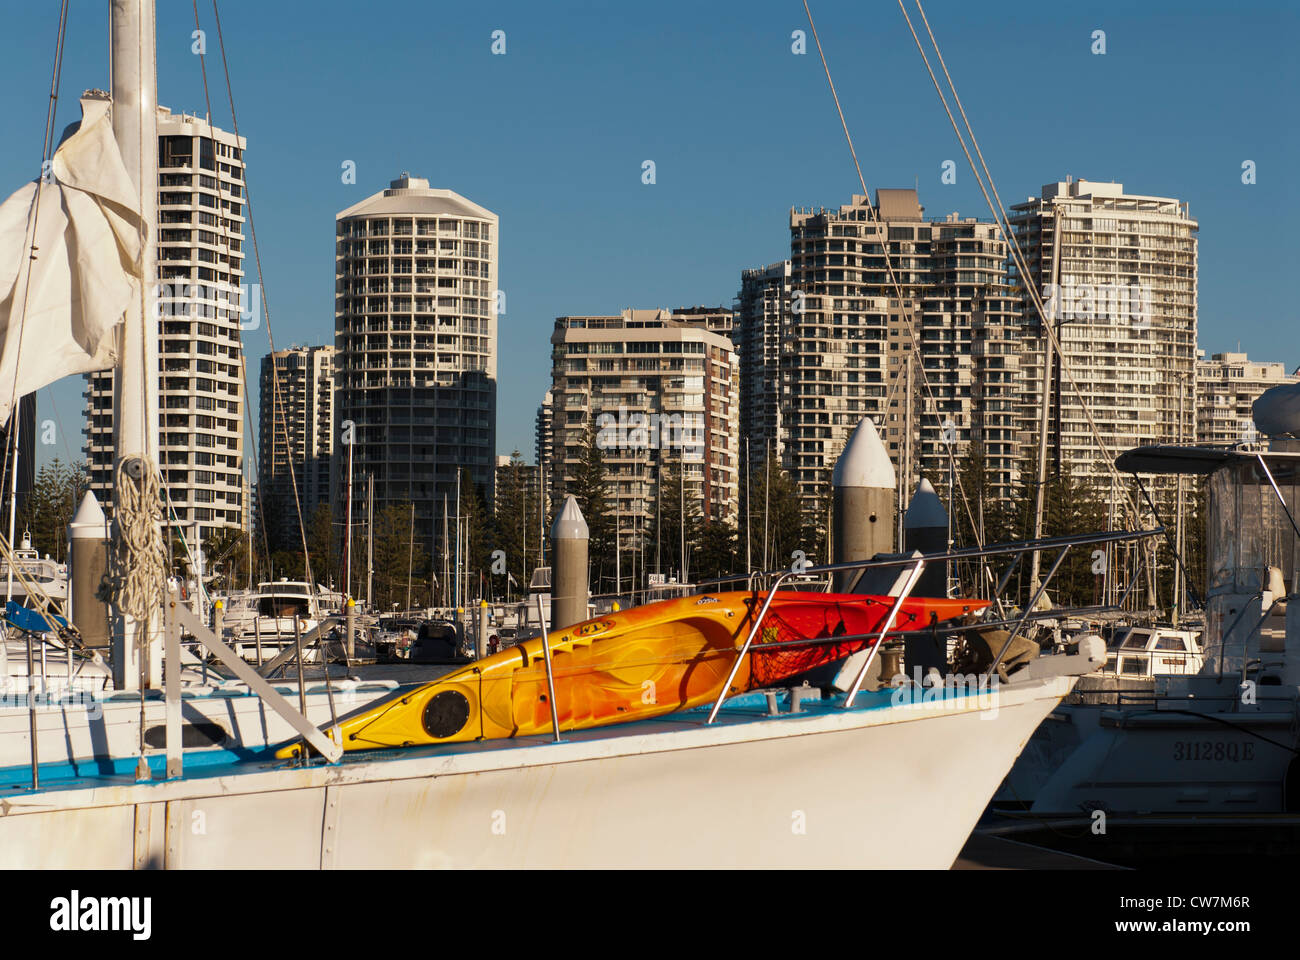 Boats moored at Marina Mirage with the Southport Yacht Club and Main Beach apartment towers in distance. Stock Photo